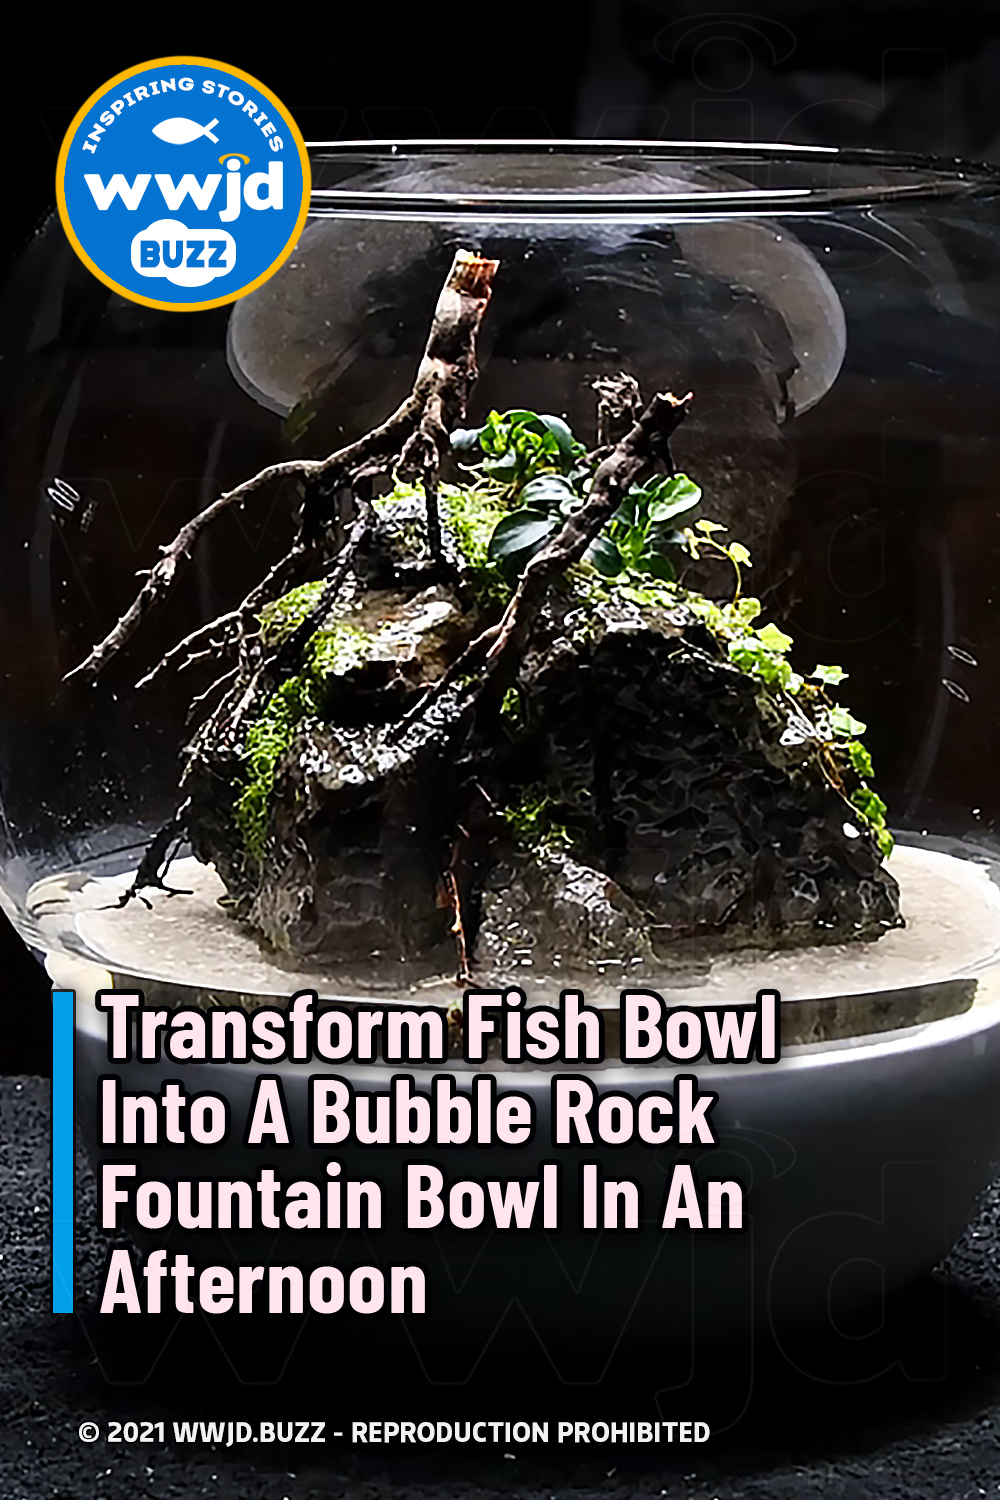 Transform Fish Bowl Into A Bubble Rock Fountain Bowl In An Afternoon